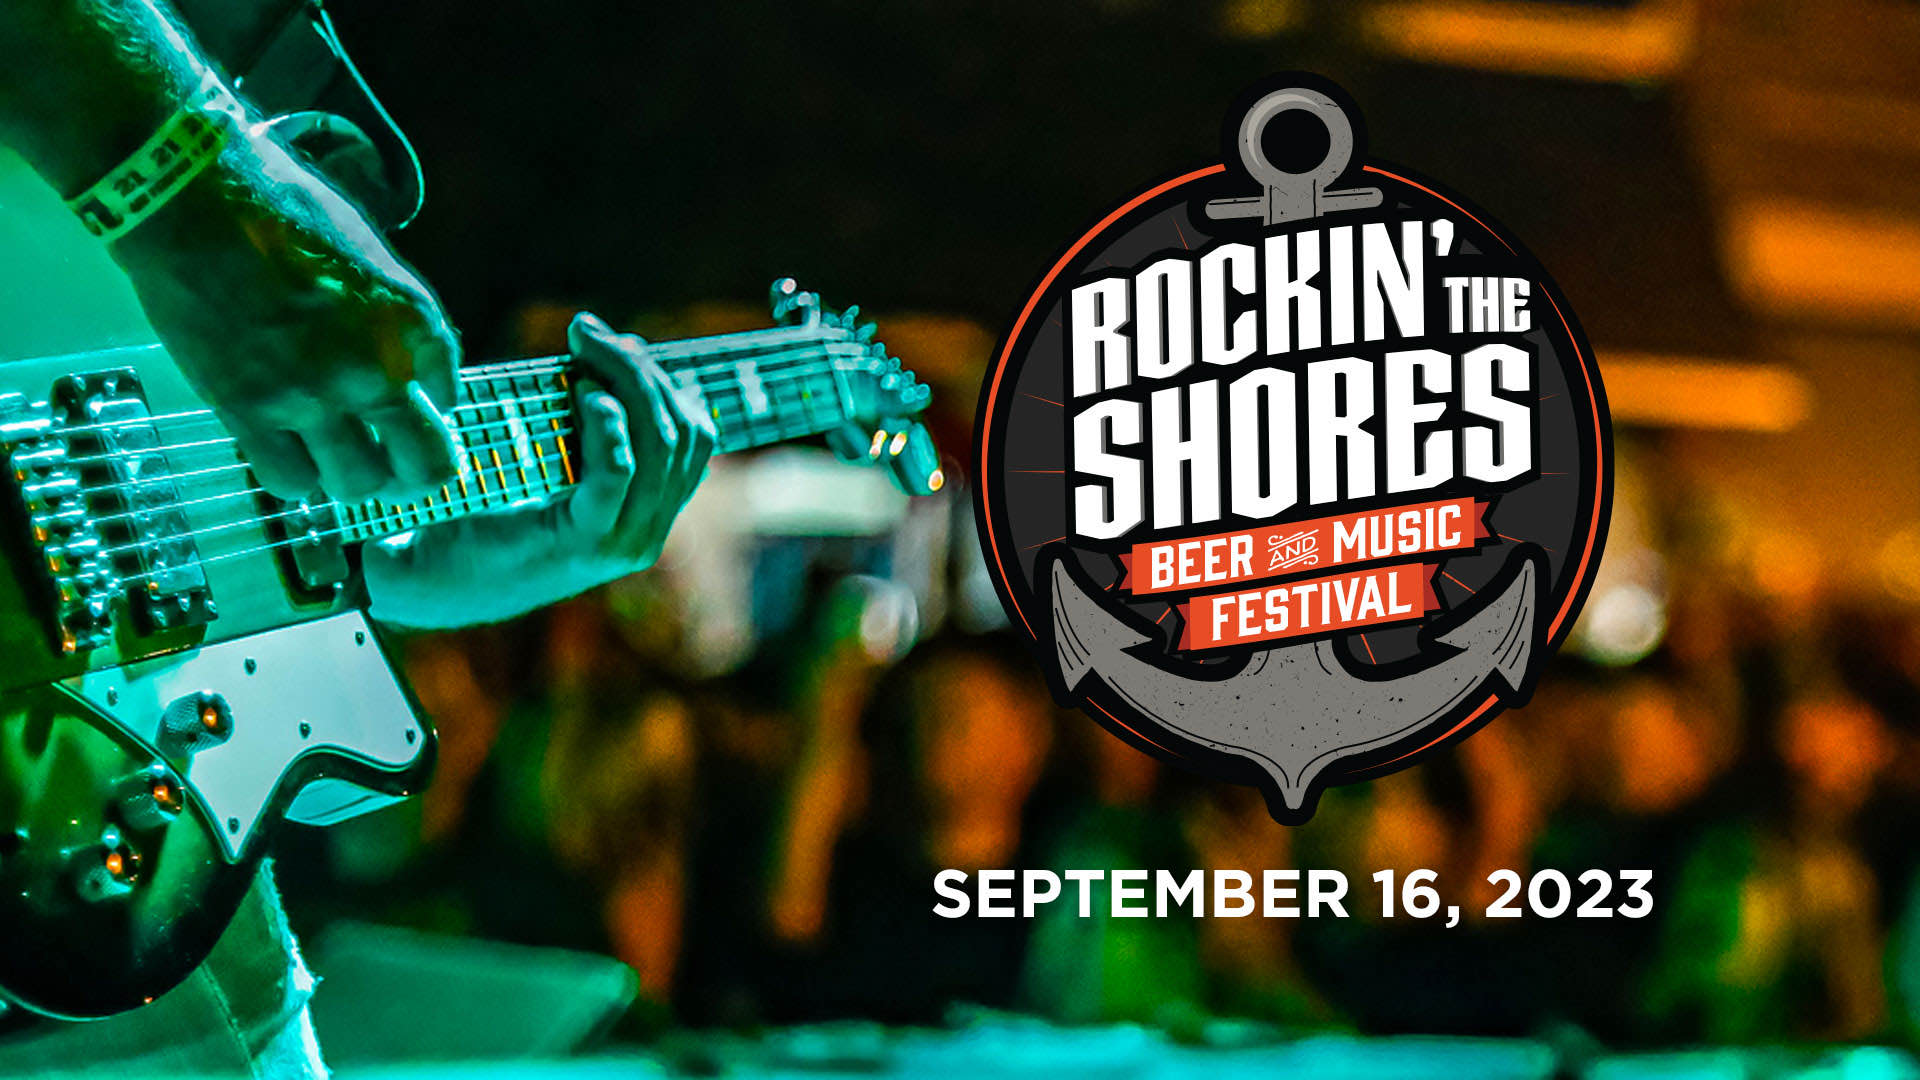 Rockin' the Shores Beer and Music Festival logo overlaying image of guitarist on stage in front of crowd; September 16, 2023